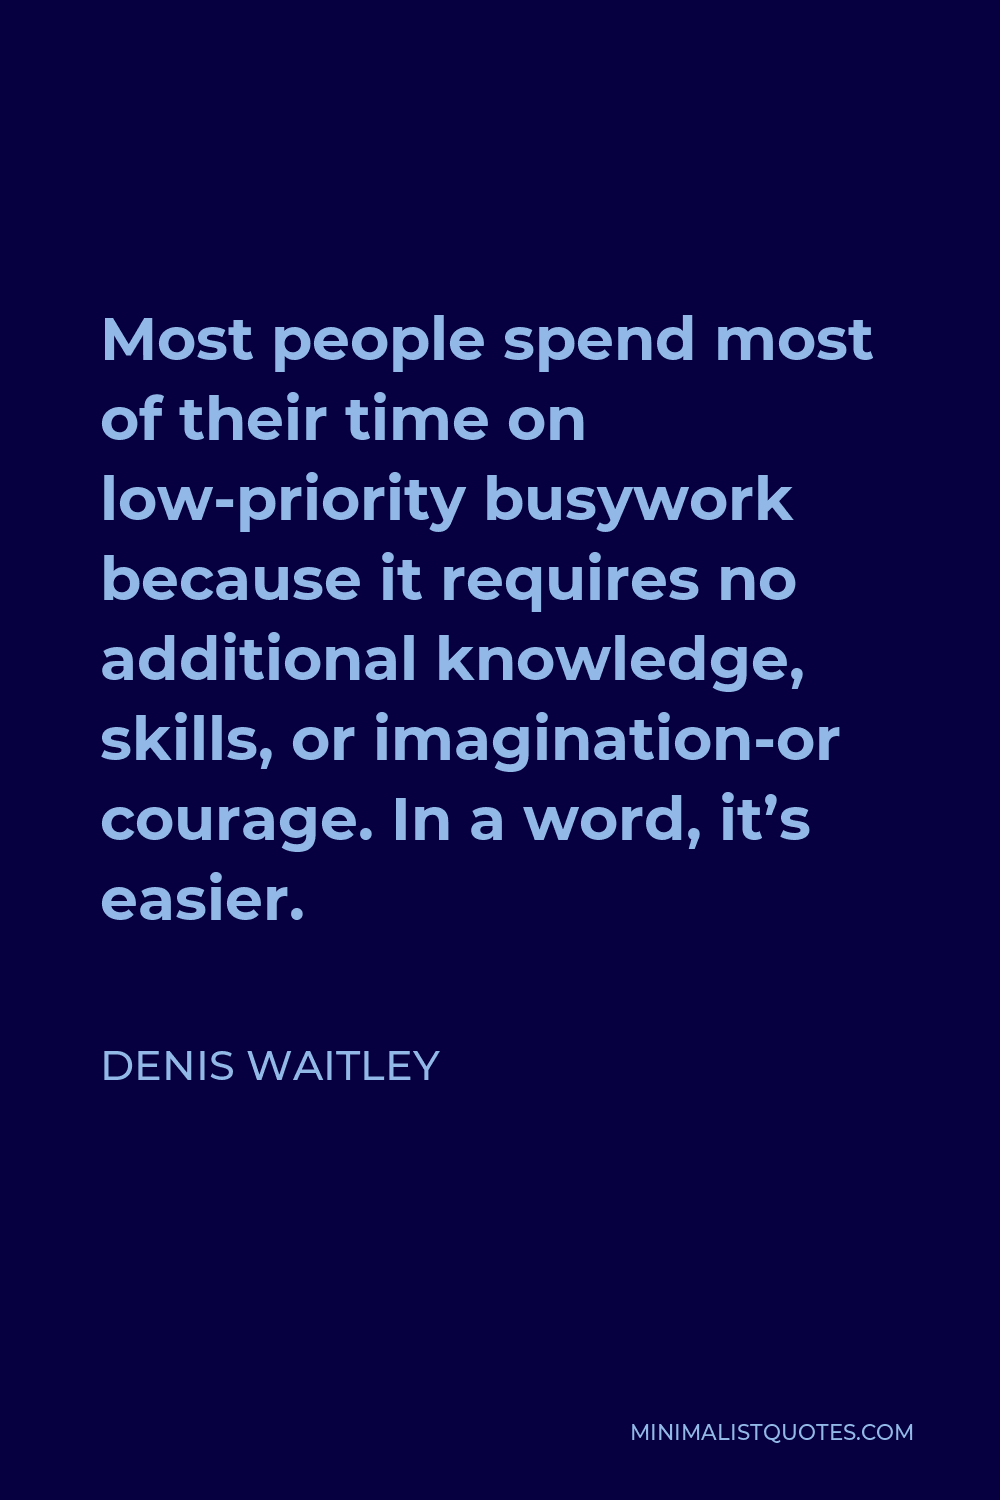 Denis Waitley Quote - Most people spend most of their time on low-priority busywork because it requires no additional knowledge, skills, or imagination-or courage. In a word, it’s easier.